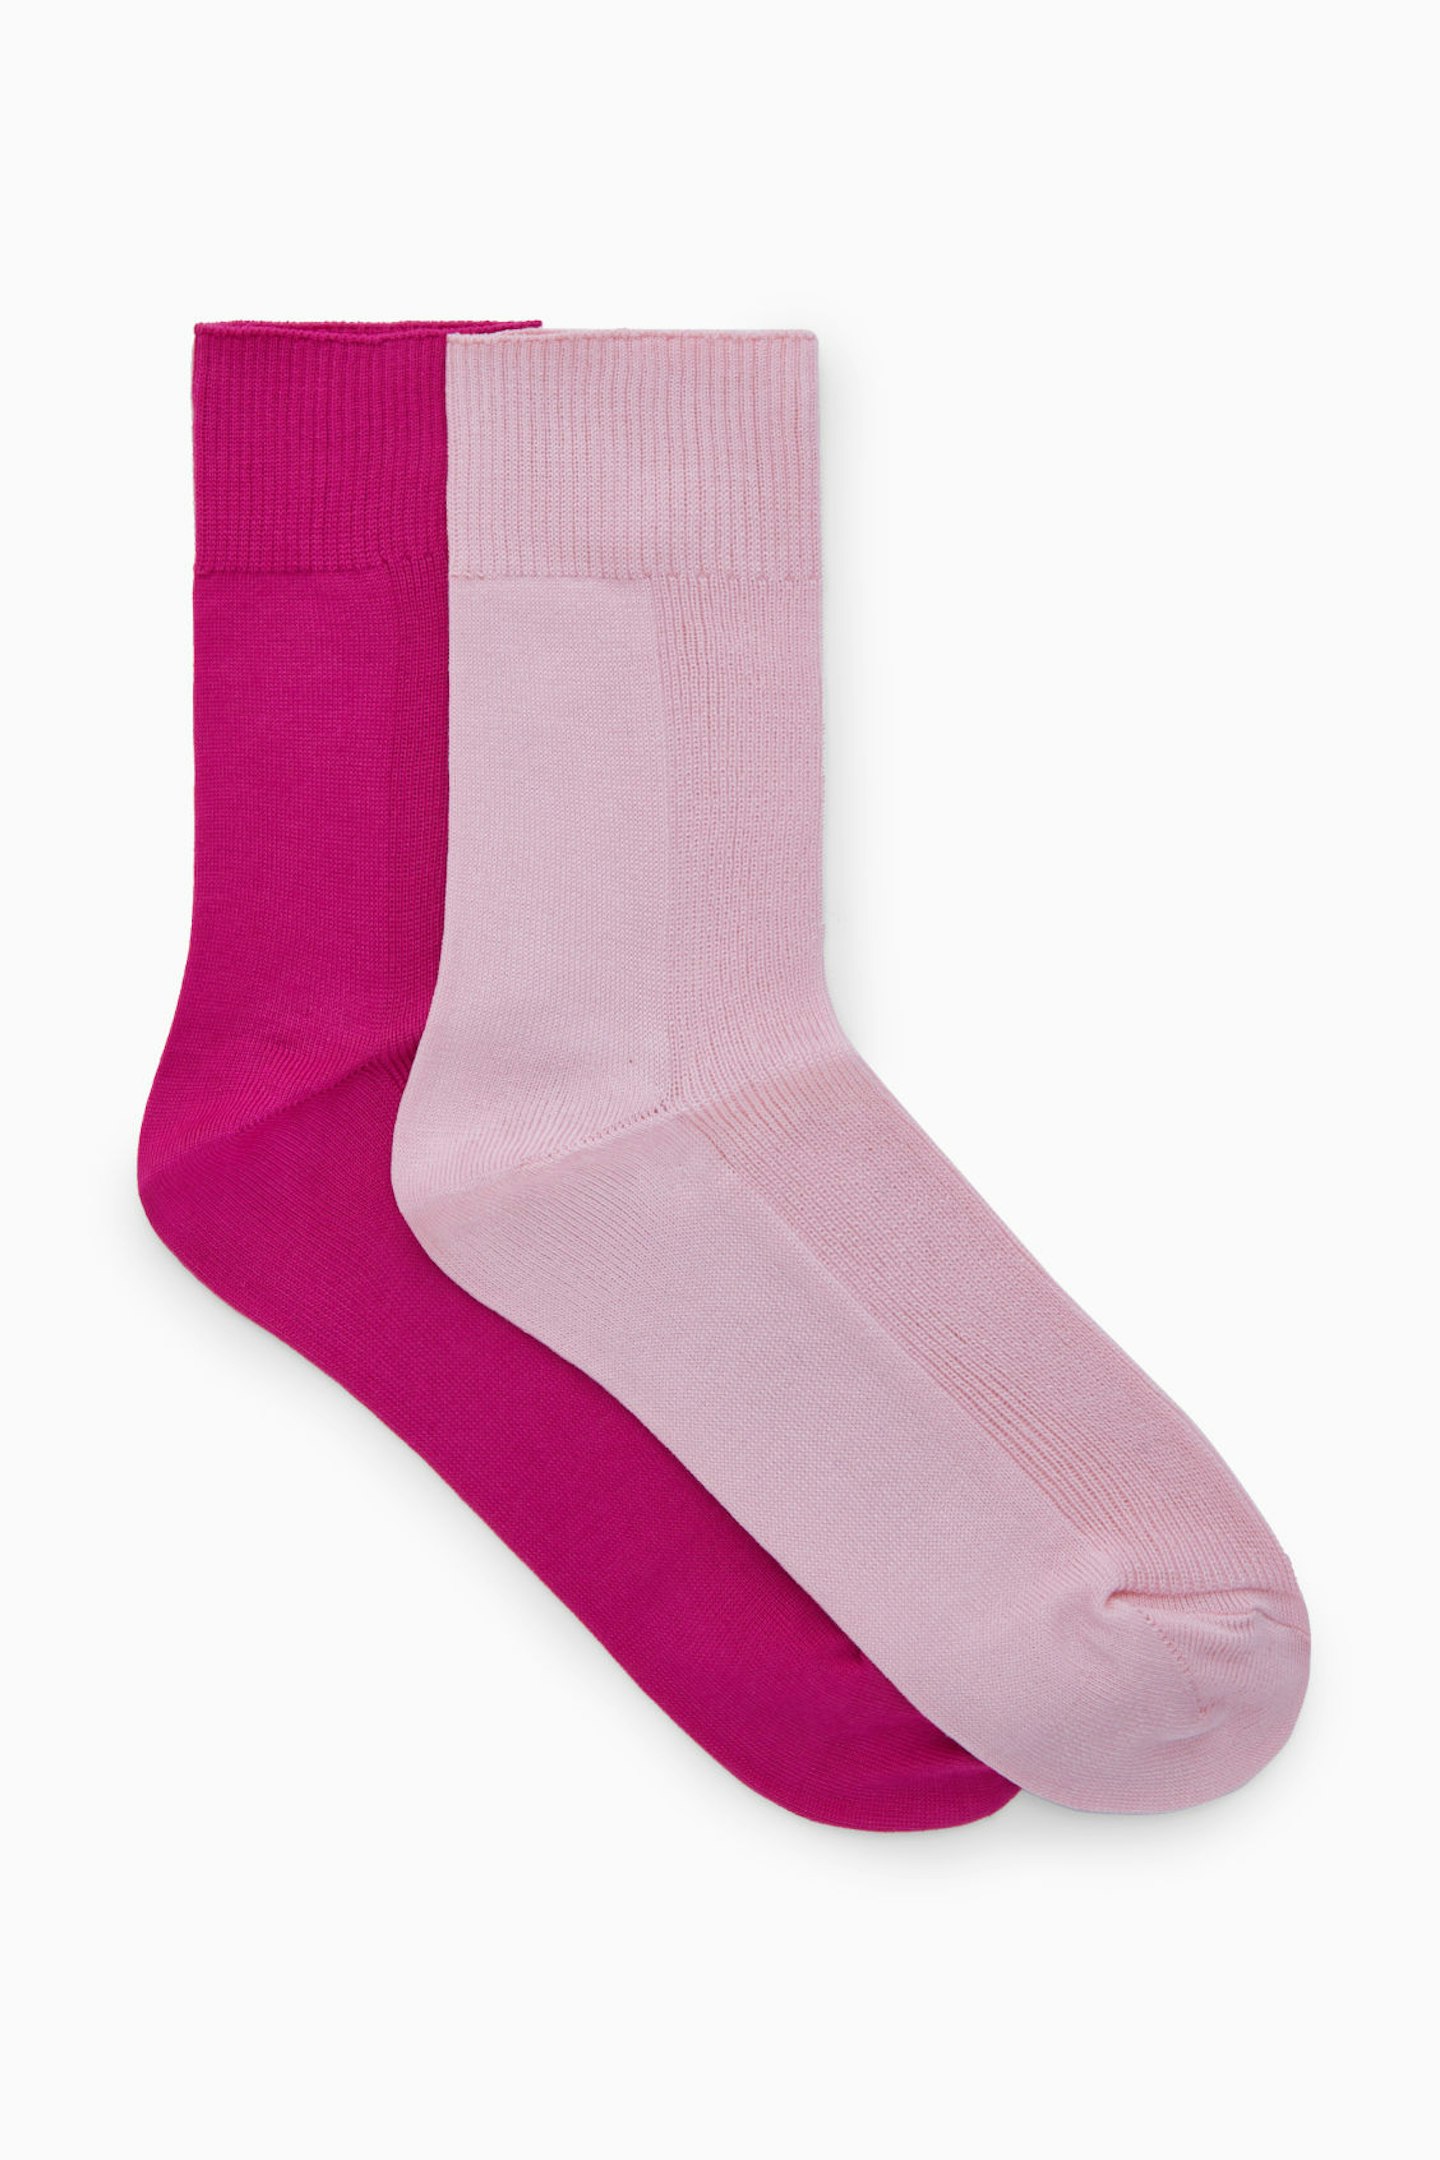 COS, 2-Pack Ribbed Panel Socks, £10